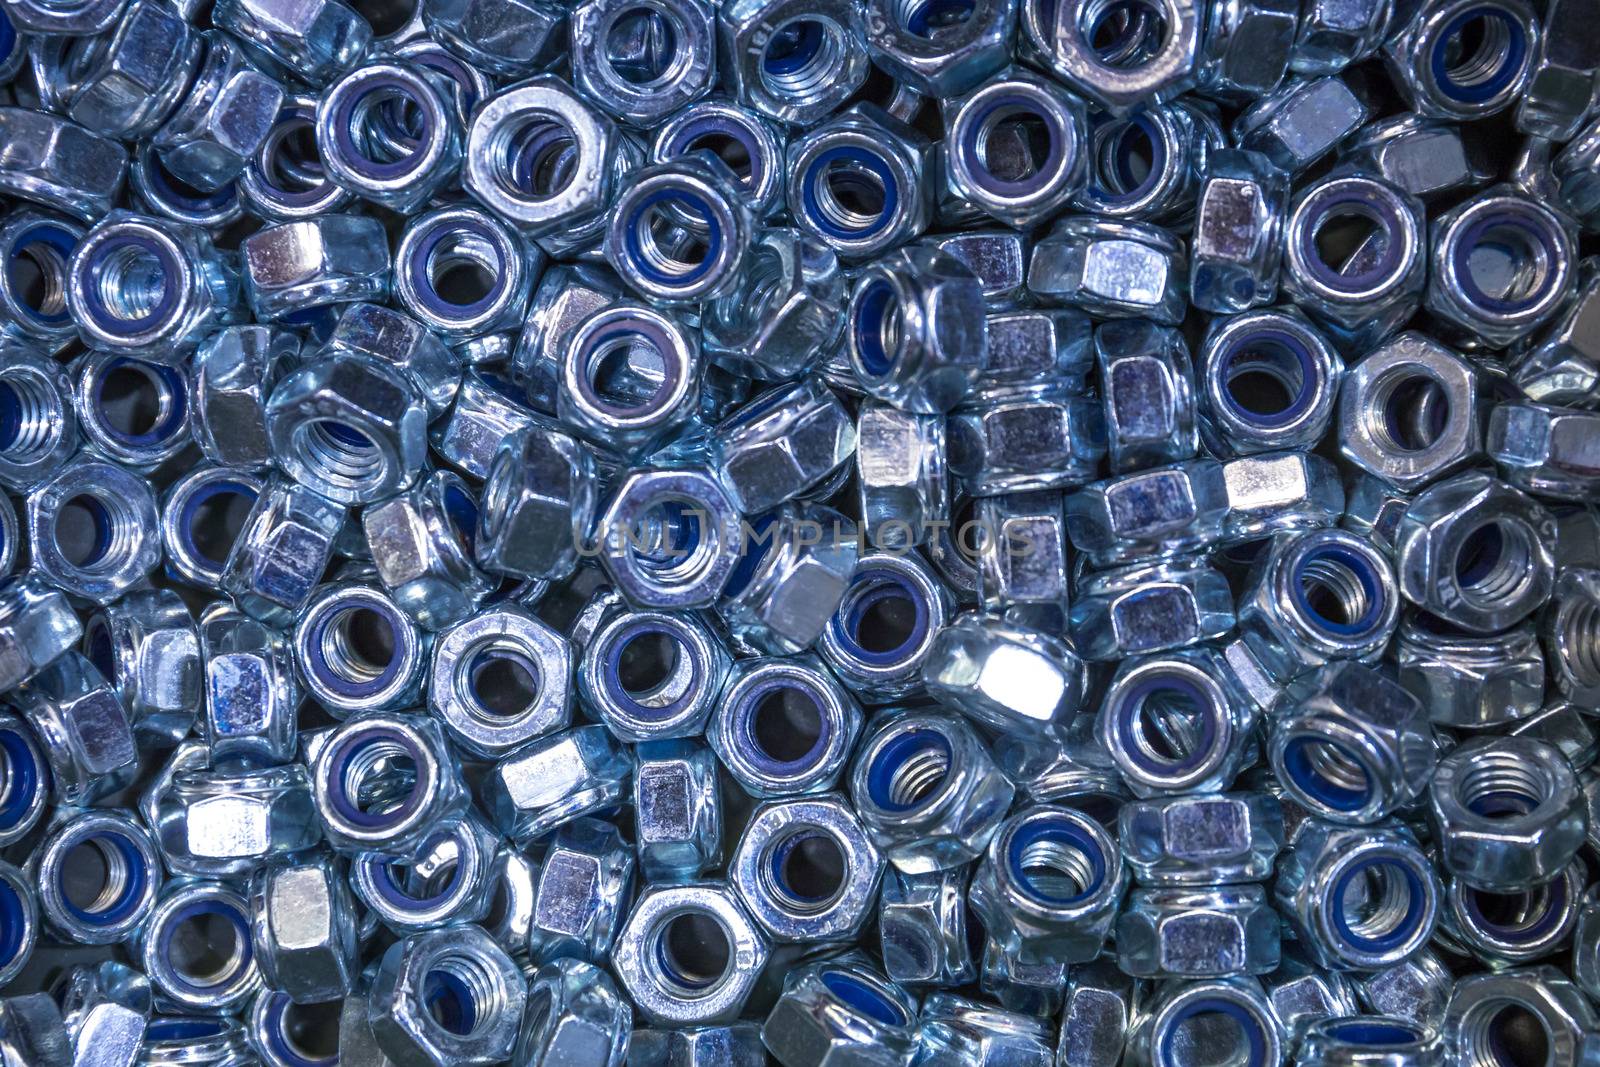 A pile of galvanized industrial nuts.